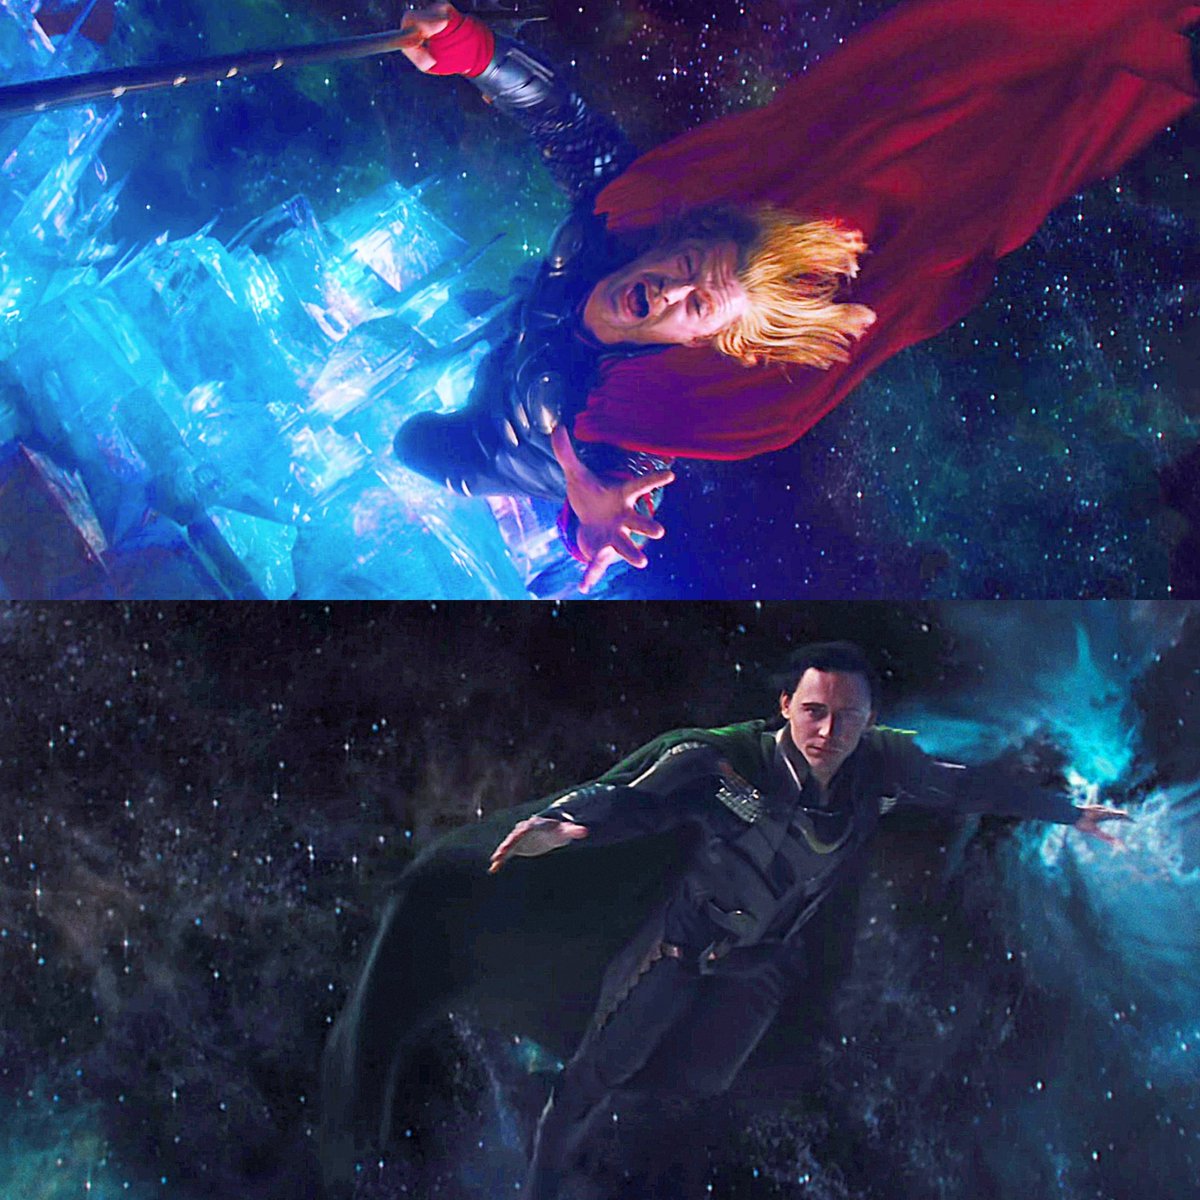 RT @PrettiestThor: Look at their outstretched hands.... Did Loki remember Thor's screams?? https://t.co/X3A5v3JCYs